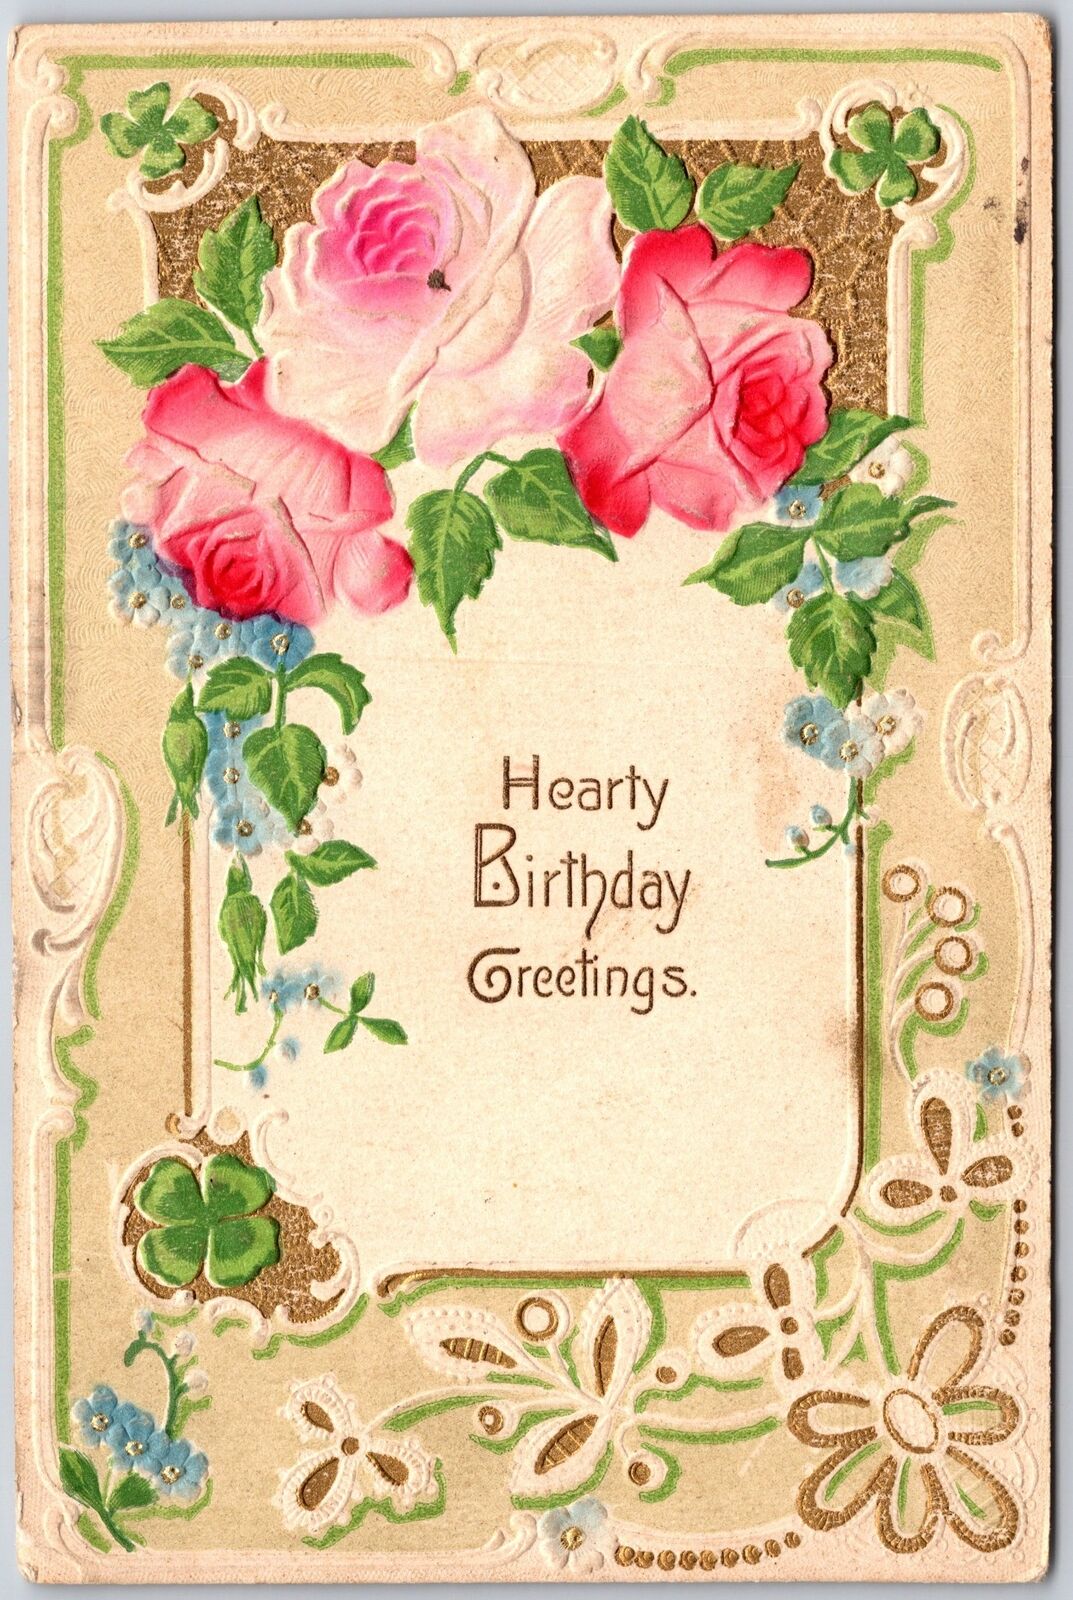 1911 Hearty Birthday Greetings Embossed Rose Flower Bordered Posted Postcard